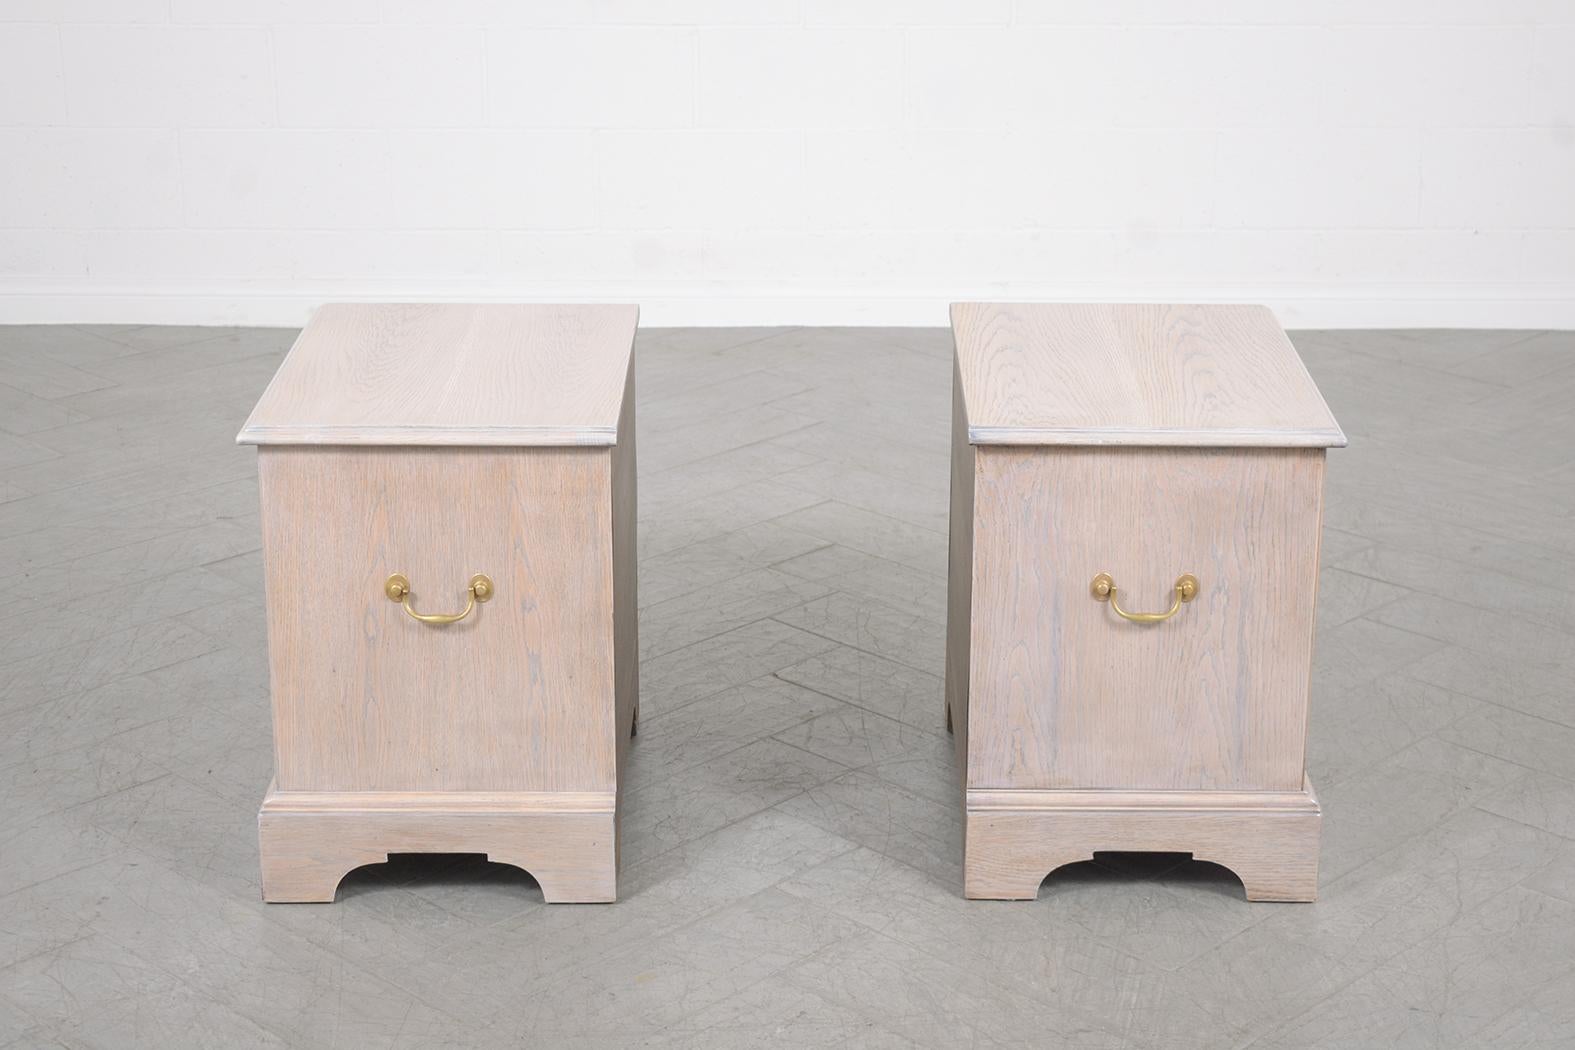 Plated Restored 1960s White Oak Bedside Tables with Whitewashed Finish & Brass Handles For Sale